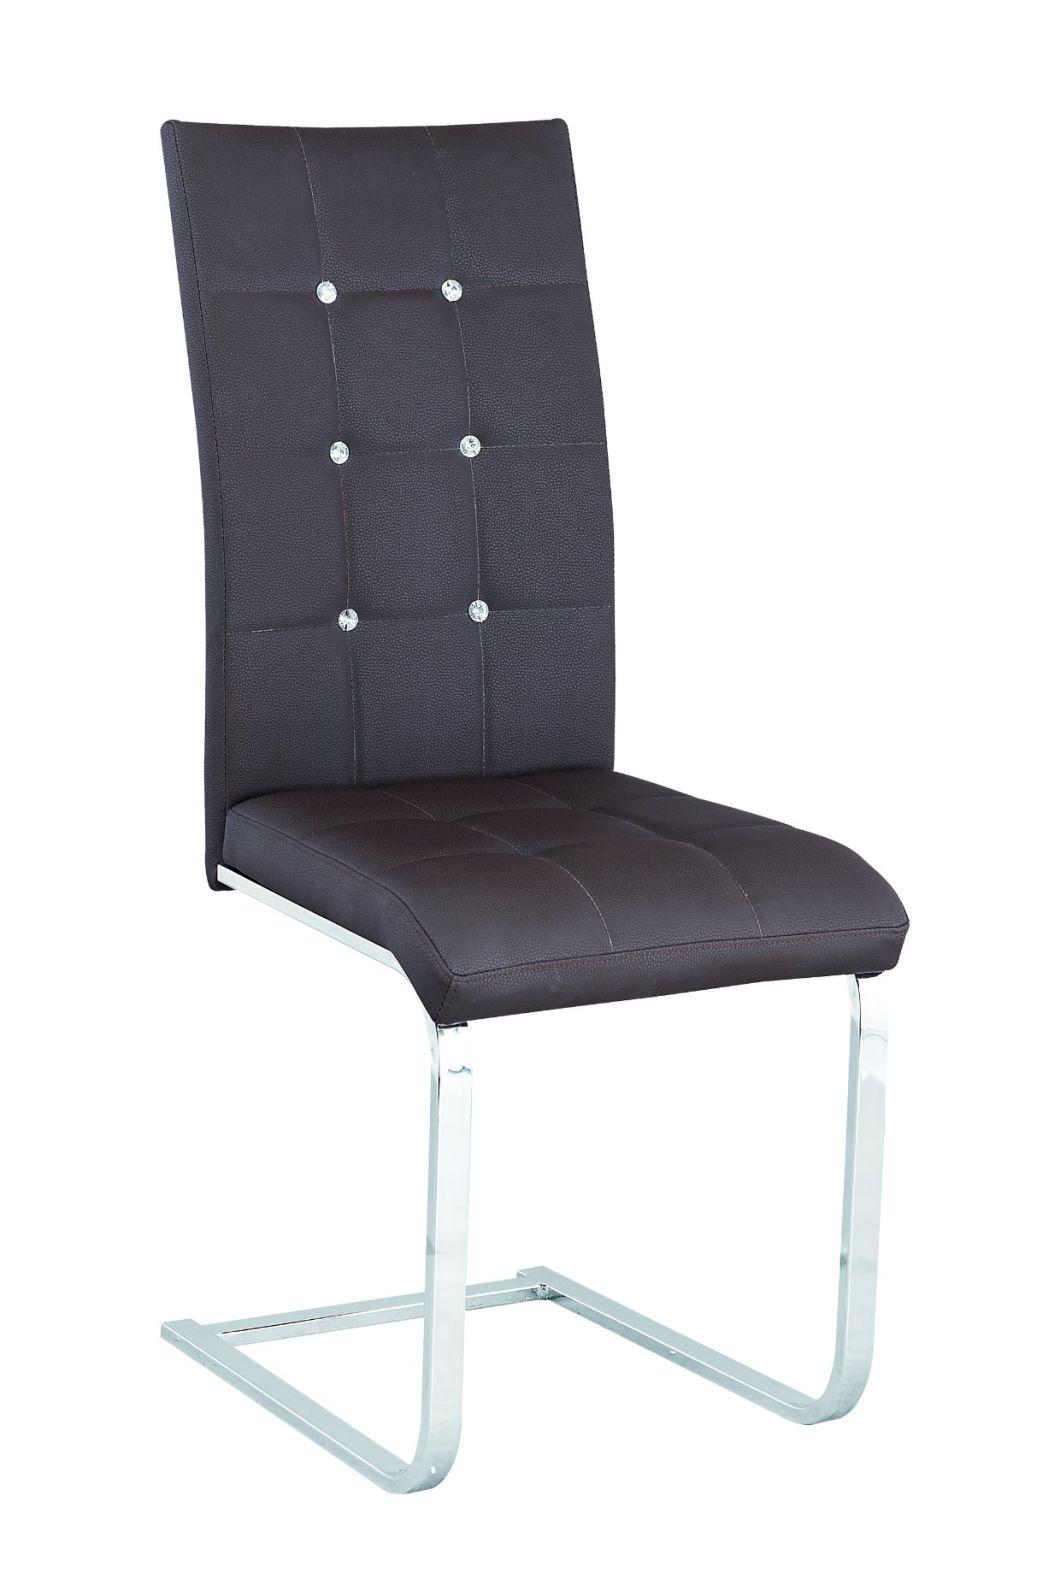 Brown PU with The Button on The Back Chrome Legs Dining Chair